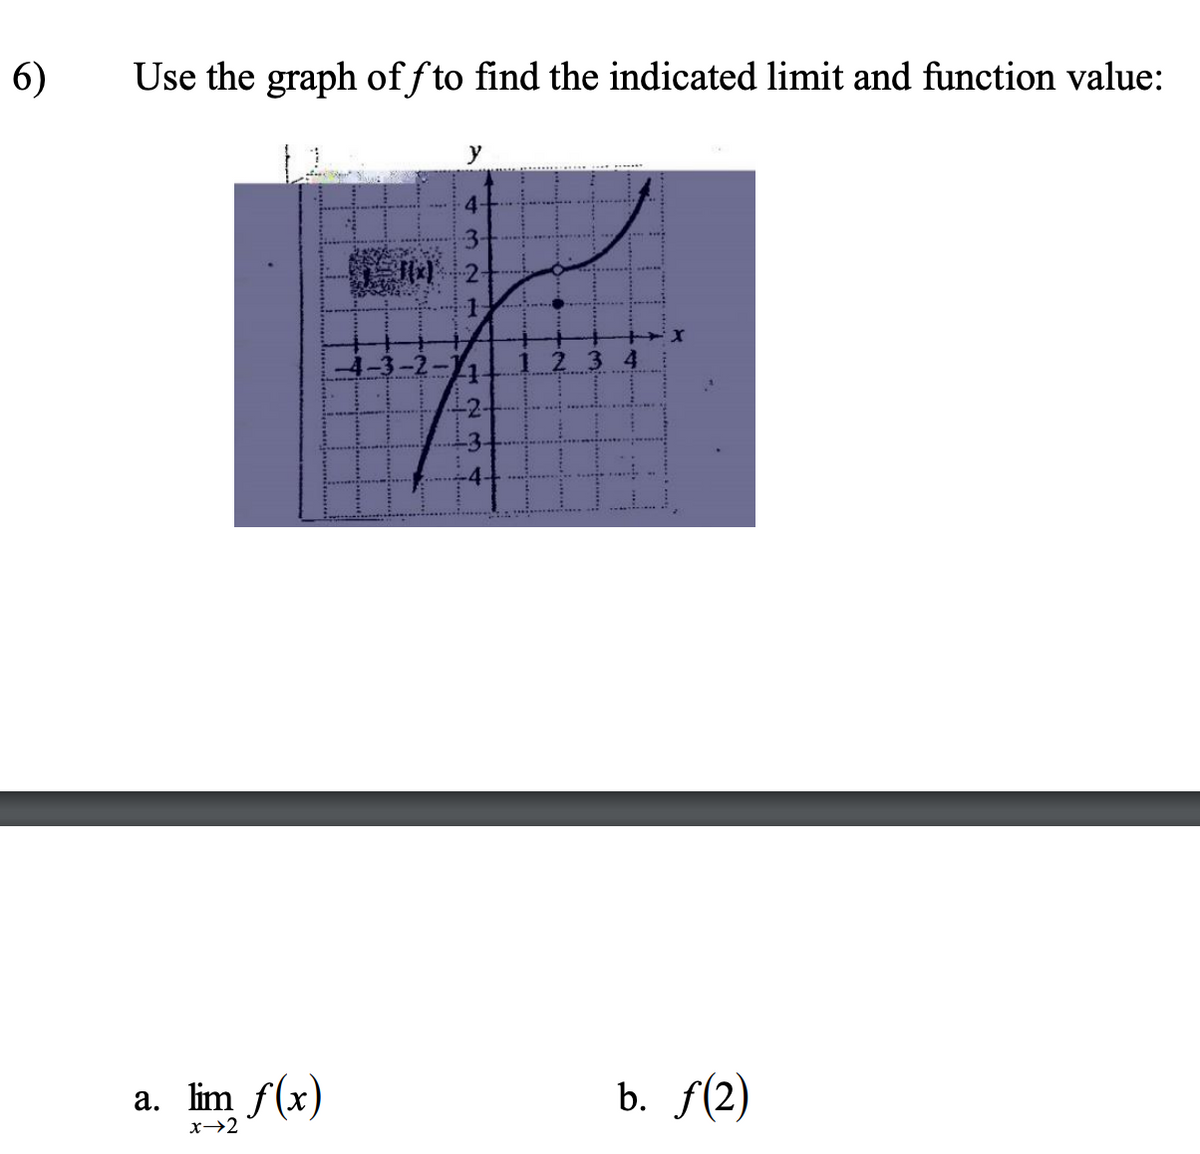 6)
Use the graph of f to find the indicated limit and function value:
y
4-
1-
12
4
a. lim f(x)
b. f(2)
x→2
